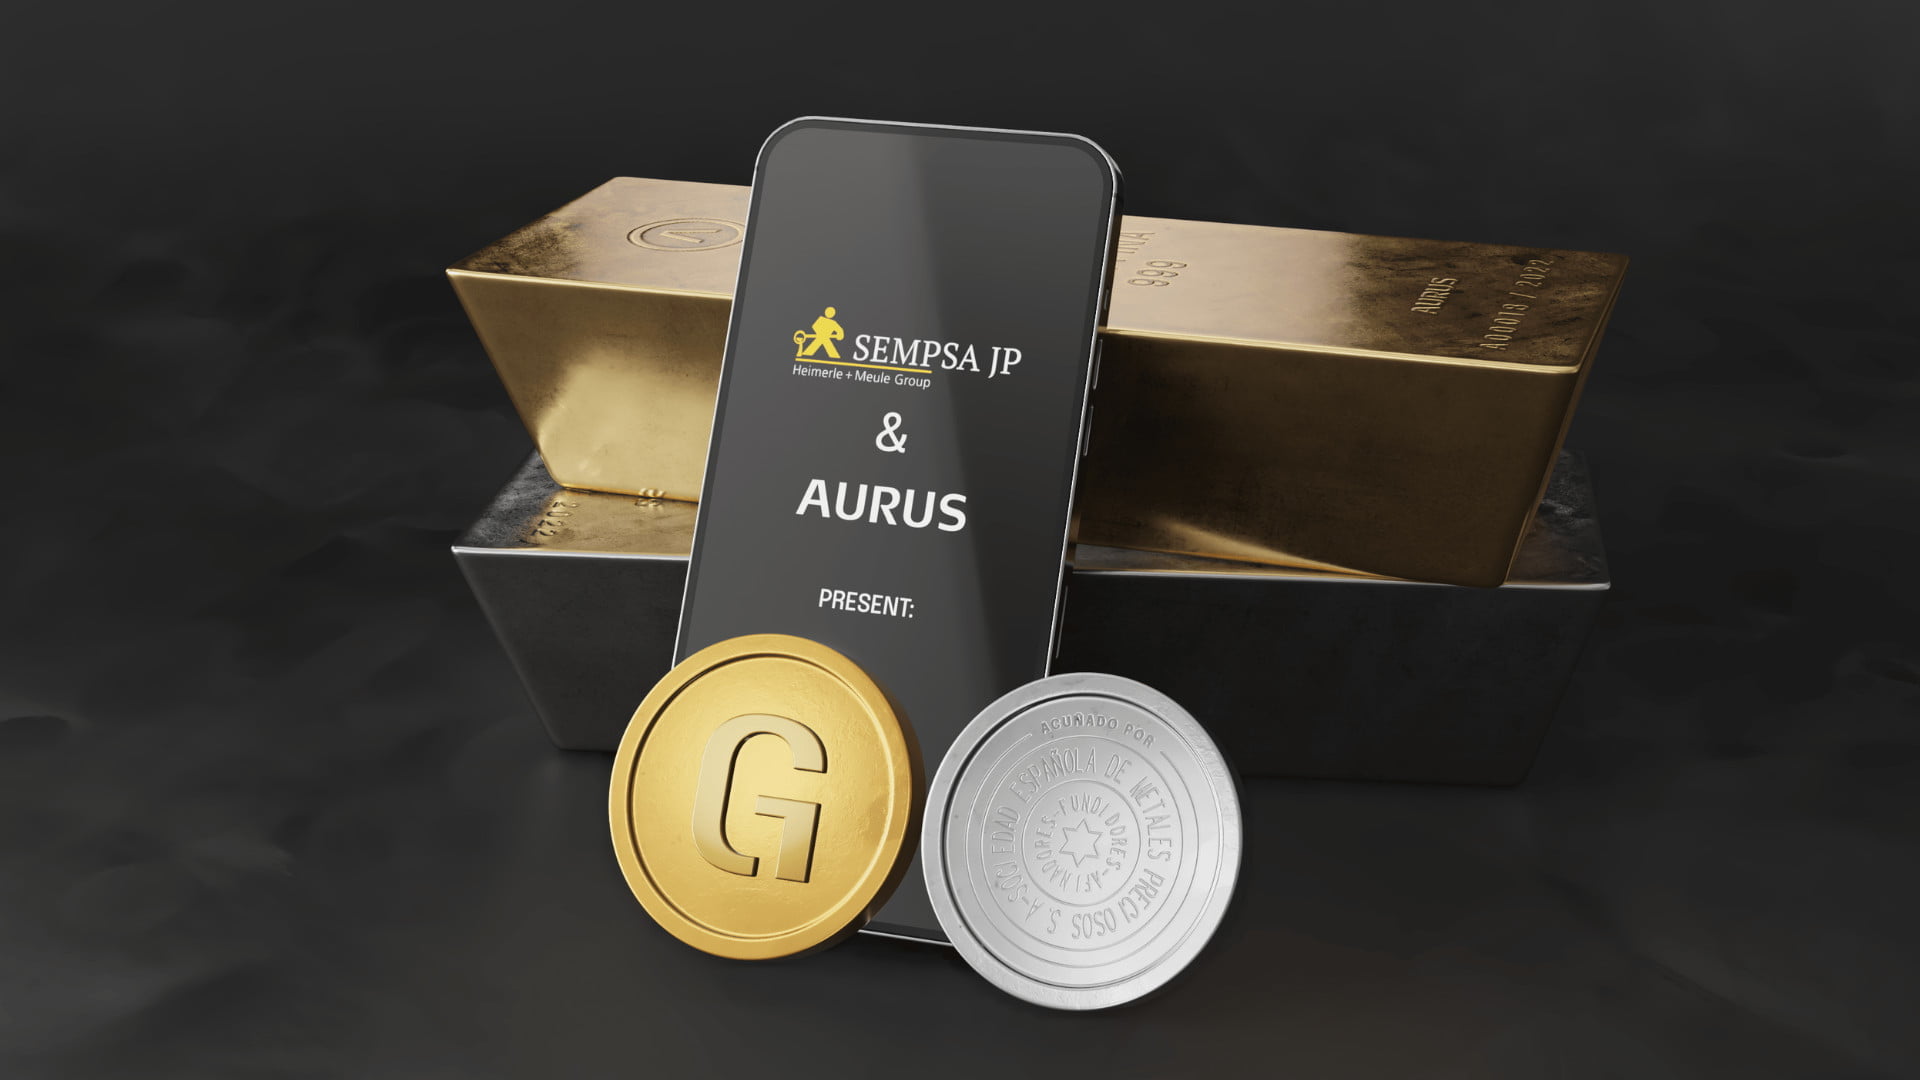 SEMPSA JP, LBMA Good Delivery Refinery Launches Tokenized Gold and Silver on the Blockchain in Partnership with Aurus 2